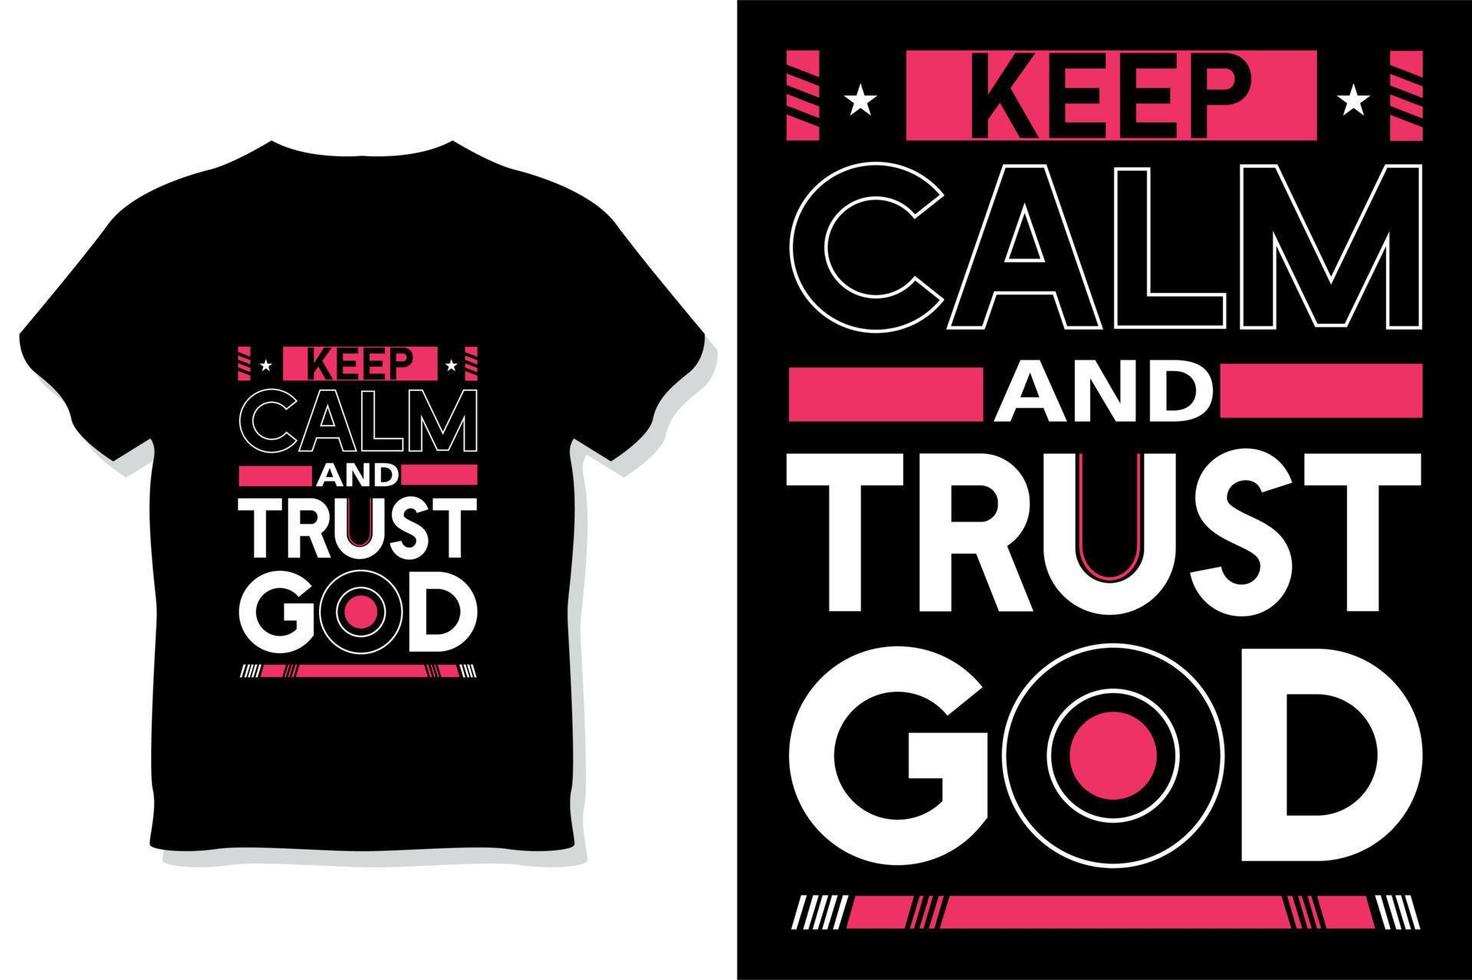 Keep calm and trust god motivational quote typography t shirt design vector